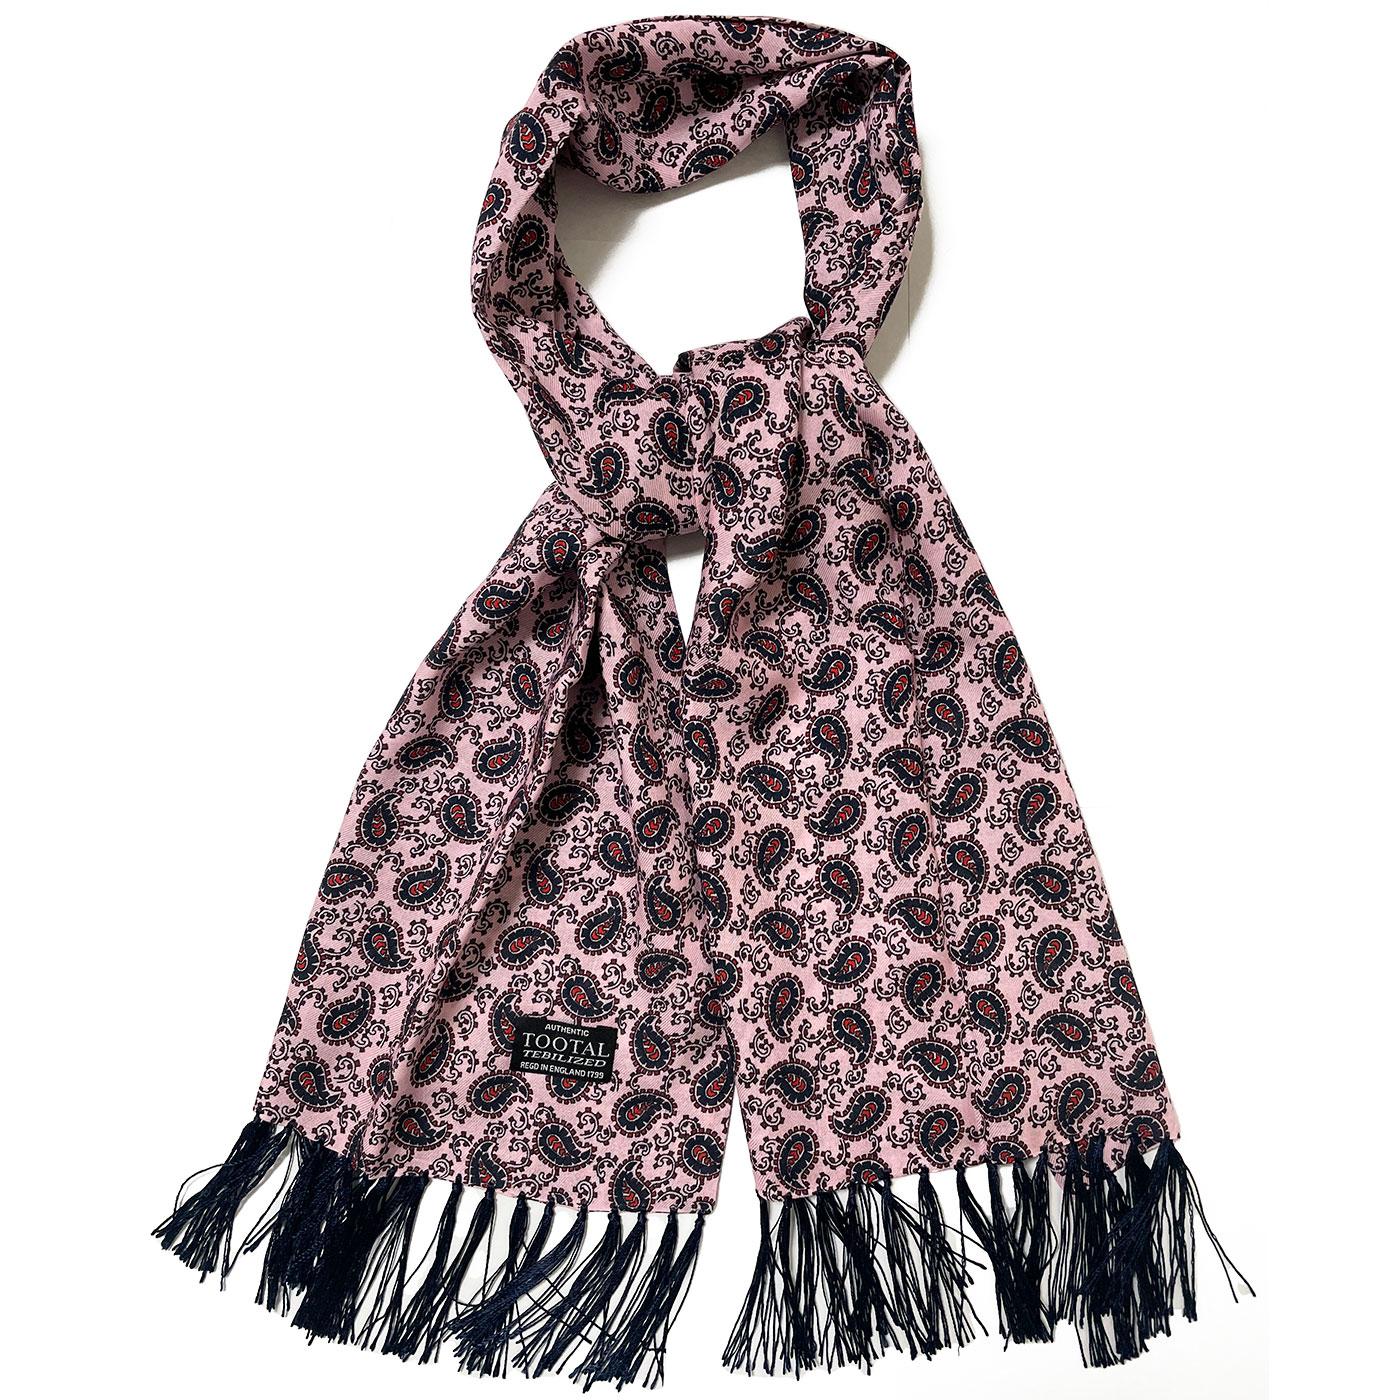 TOOTAL Paisley Fringed Retro Mod Rayon Scarf Pink